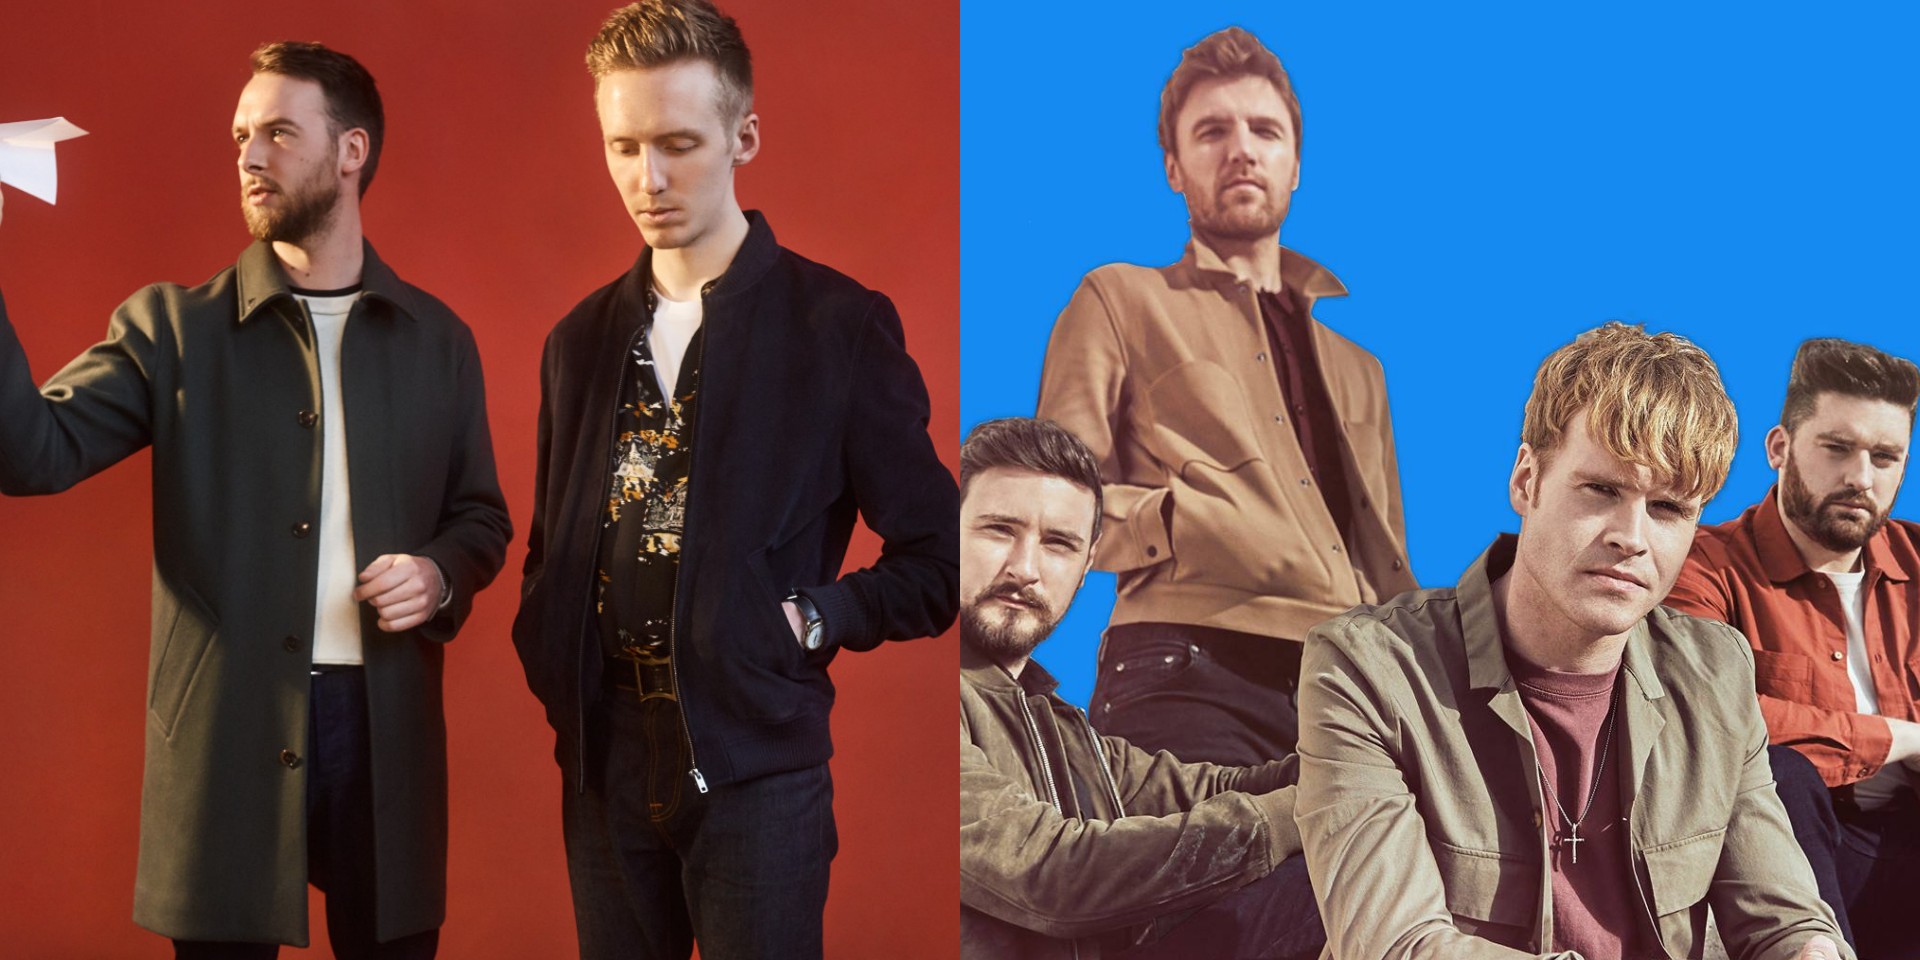 HONNE and Kodaline to perform in Kuala Lumpur — as part of Good Vibes Festival Presents series